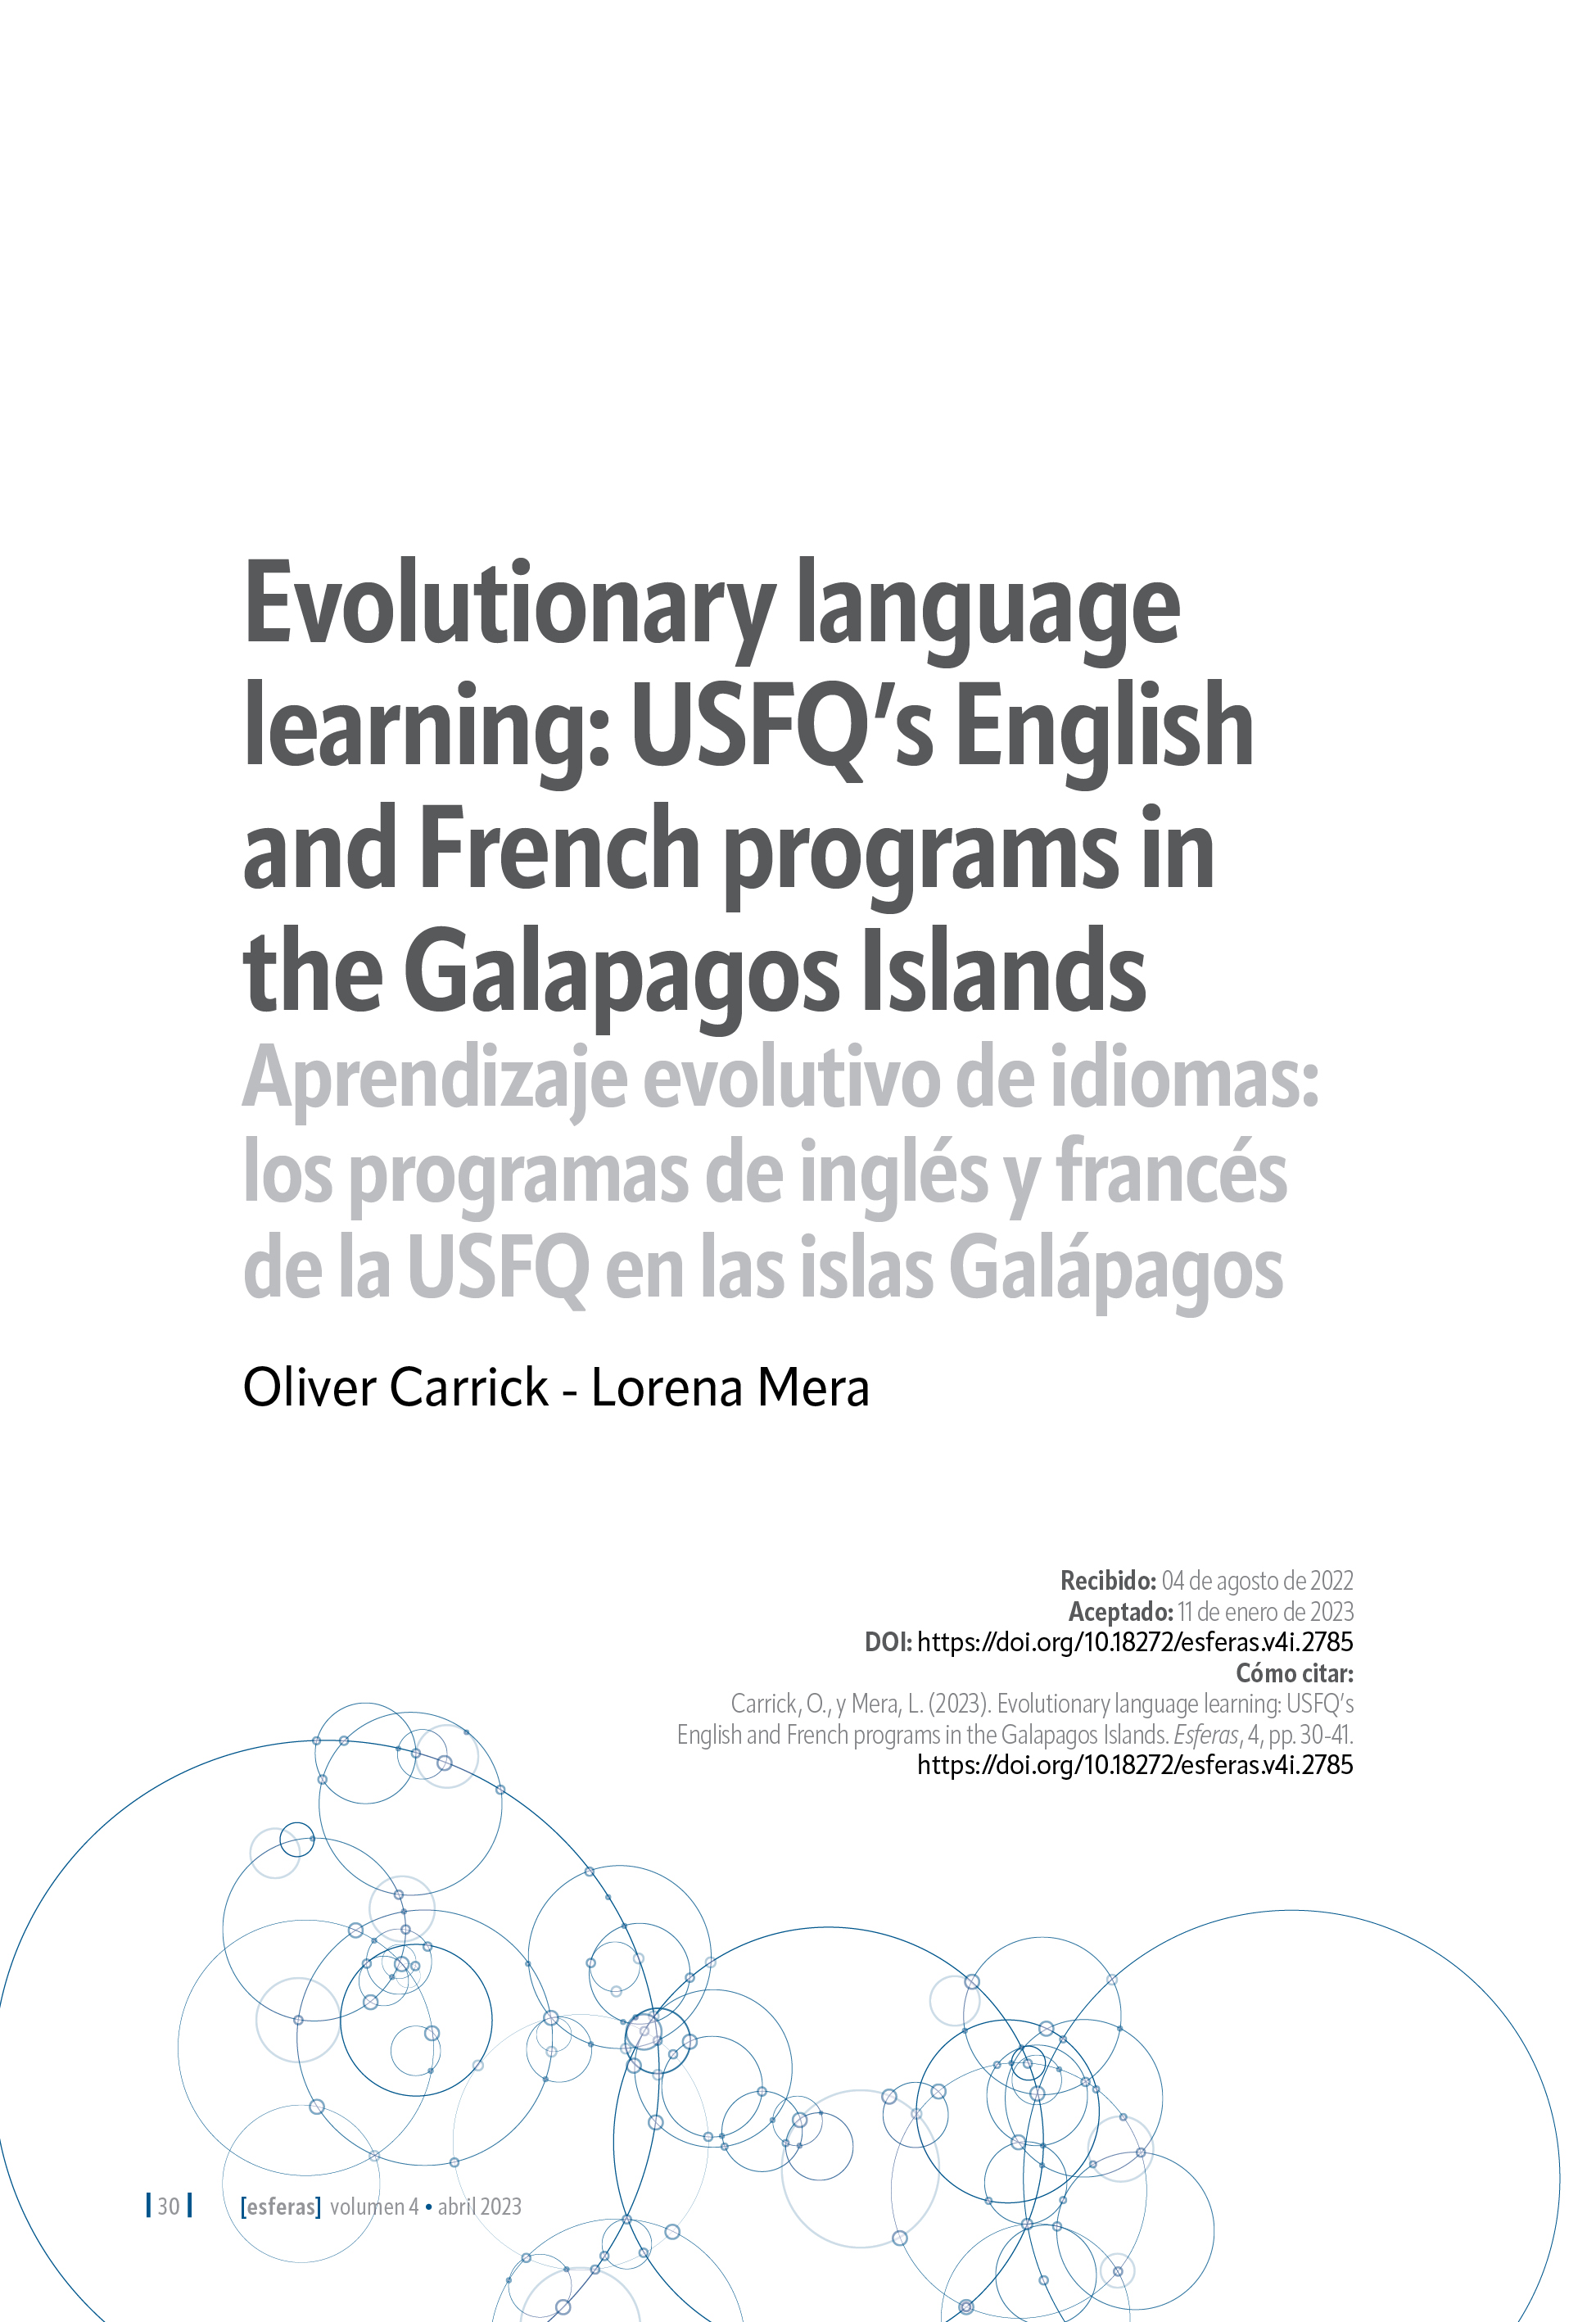 Portada del artículo "Evolutionary language learning: USFQ’s English and French programs in the Galapagos Islands"